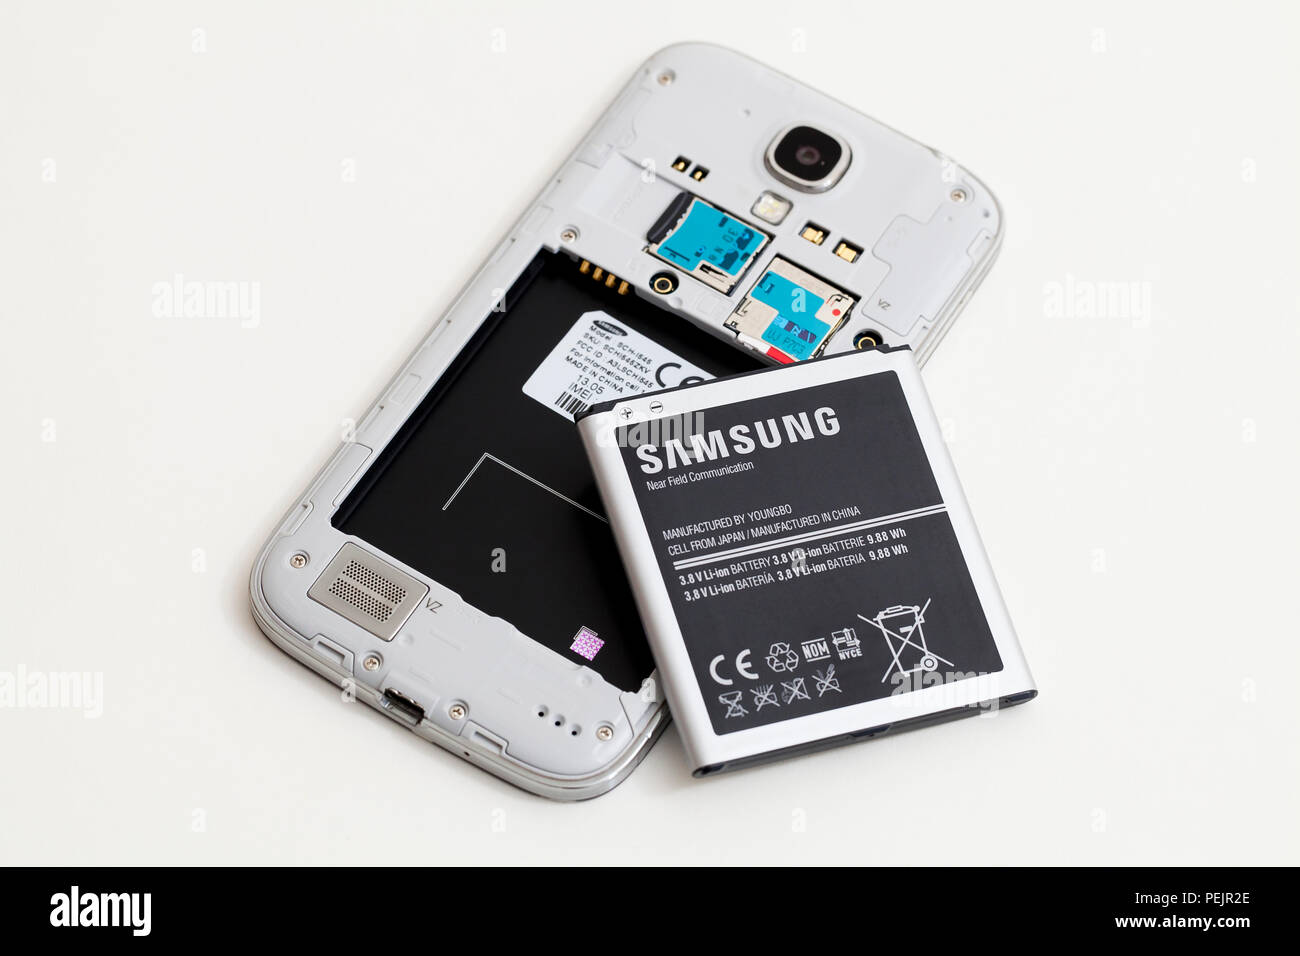 Samsung Galaxy mobile phone with back cover removed, showing Samsung battery - USA Stock Photo